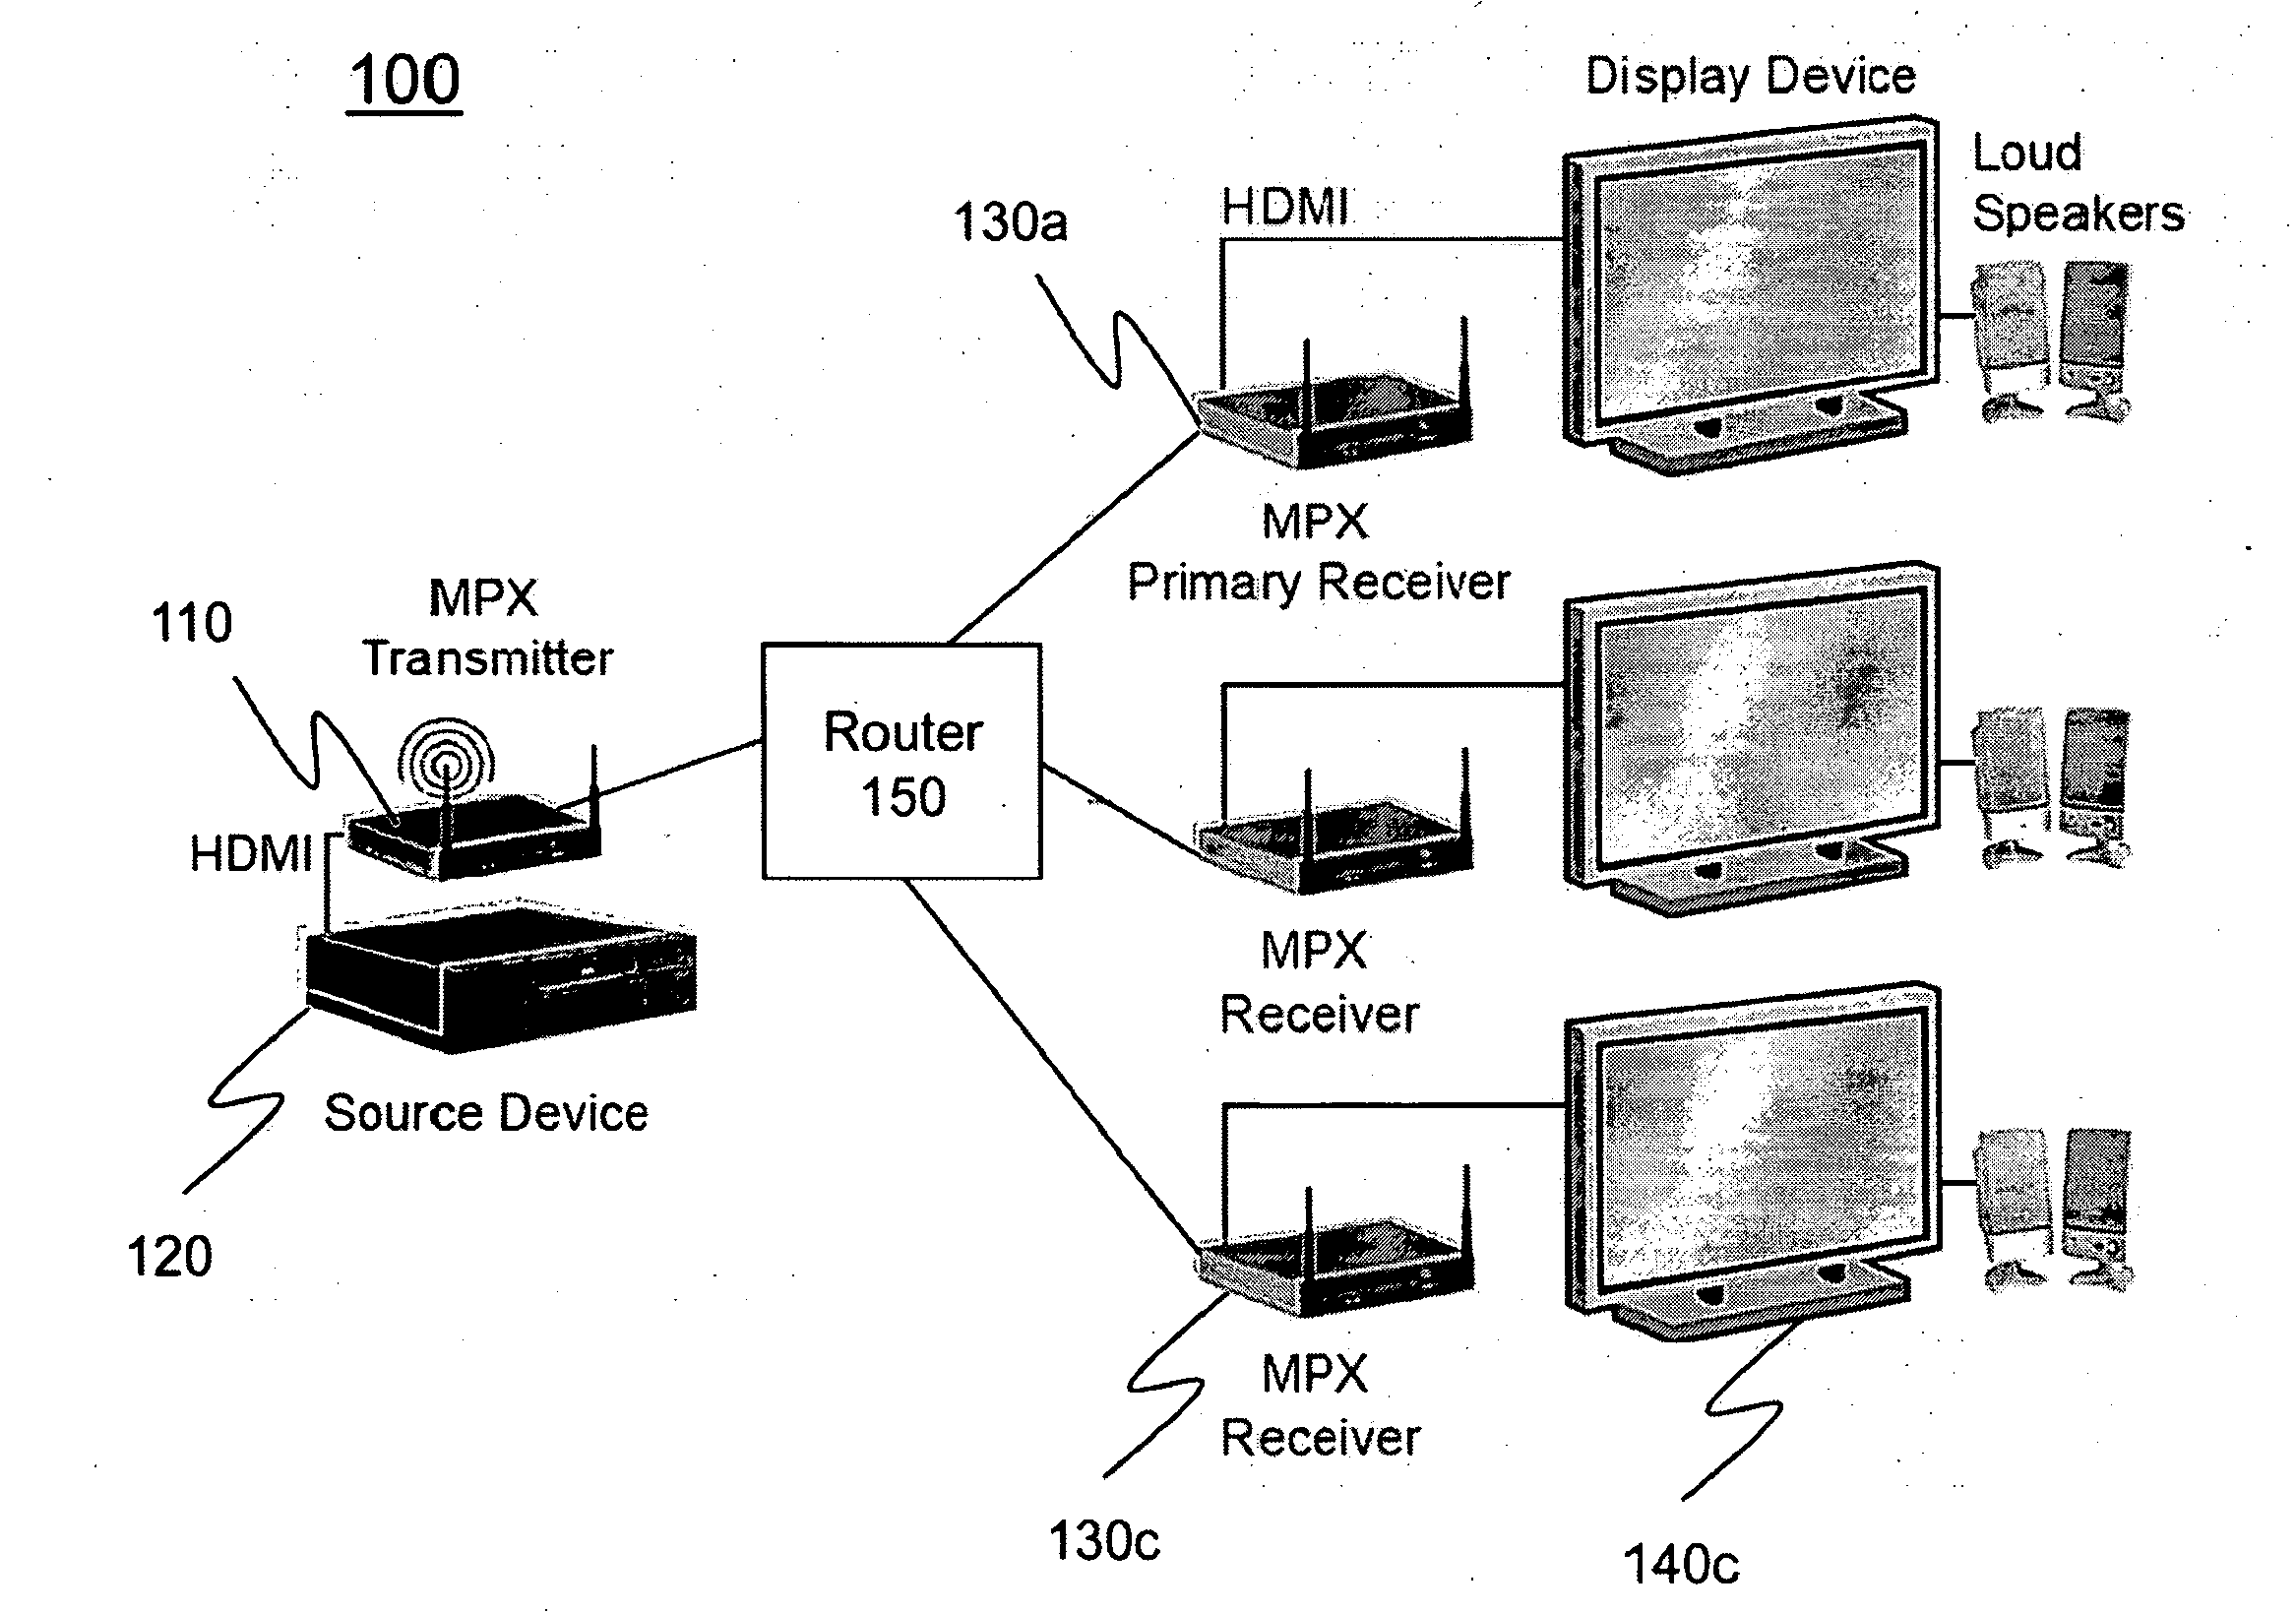 System and Method for Regulating Bandwidth in a Multicast Video Transmission System